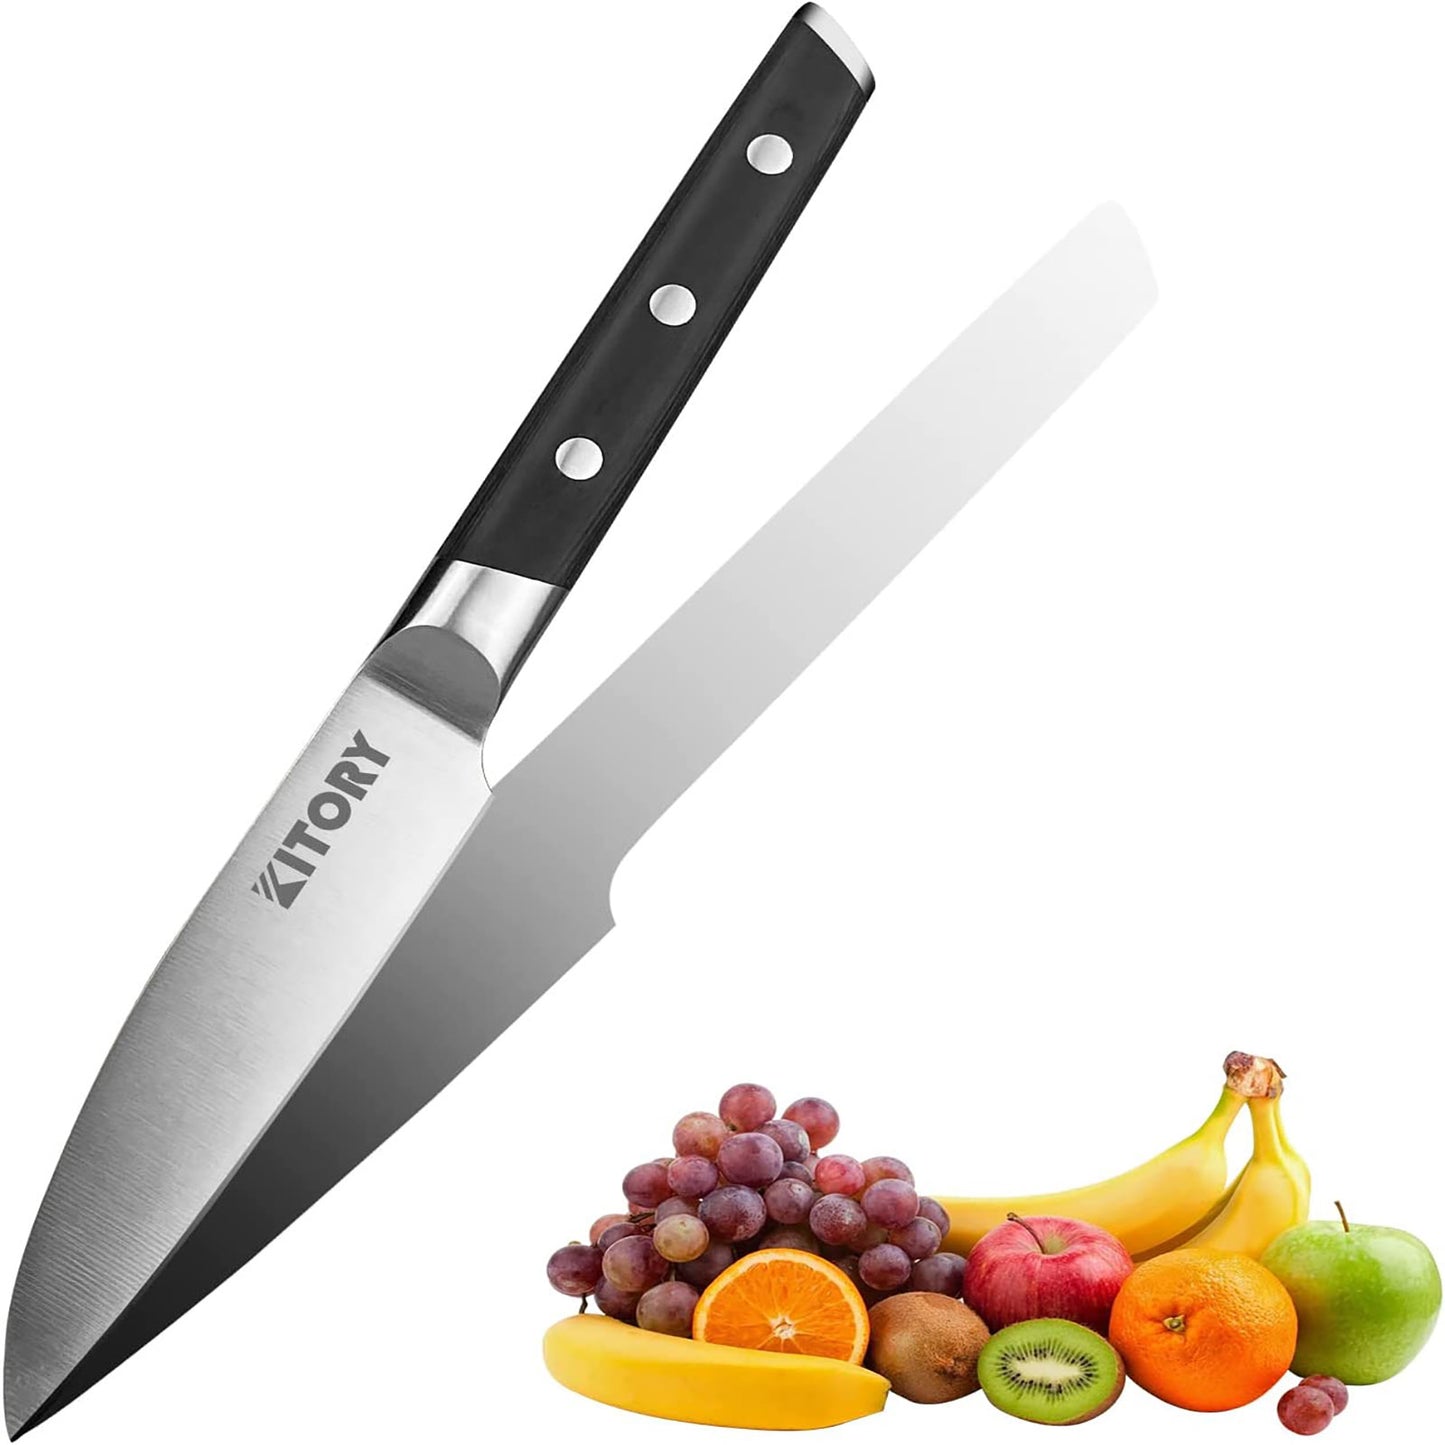 Kitory Paring Knife 4 Inch Forged High German Carbon Stainless Steel